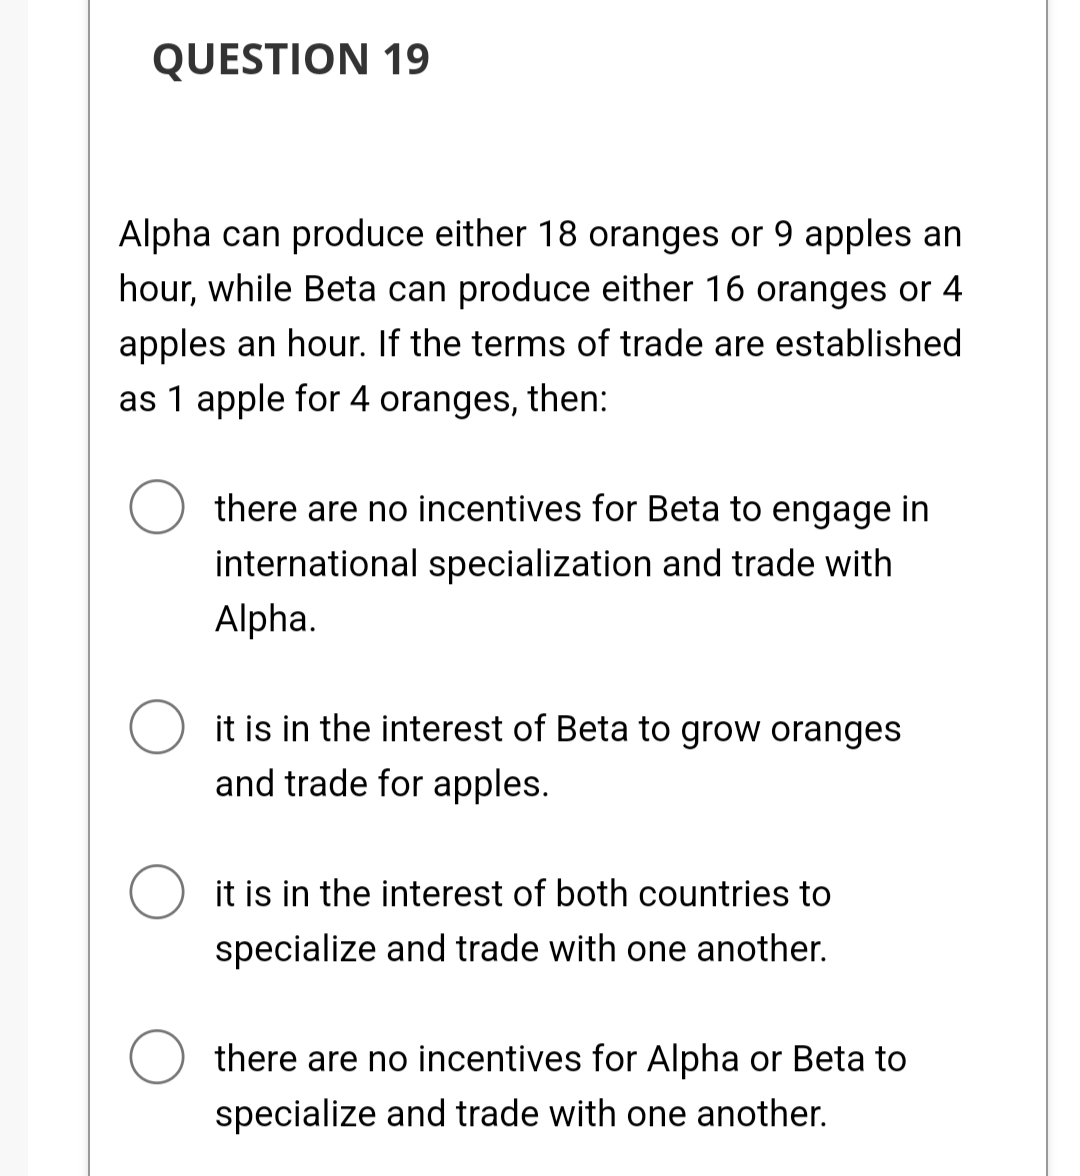 QUESTION 19
Alpha can produce either 18 oranges or 9 apples an
hour, while Beta can produce either 16 oranges or 4
apples an hour. If the terms of trade are established
as 1 apple for 4 oranges, then:
there are no incentives for Beta to engage in
international specialization and trade with
Alpha.
it is in the interest of Beta to grow oranges
and trade for apples.
O it is in the interest of both countries to
specialize and trade with one another.
there are no incentives for Alpha or Beta to
specialize and trade with one another.